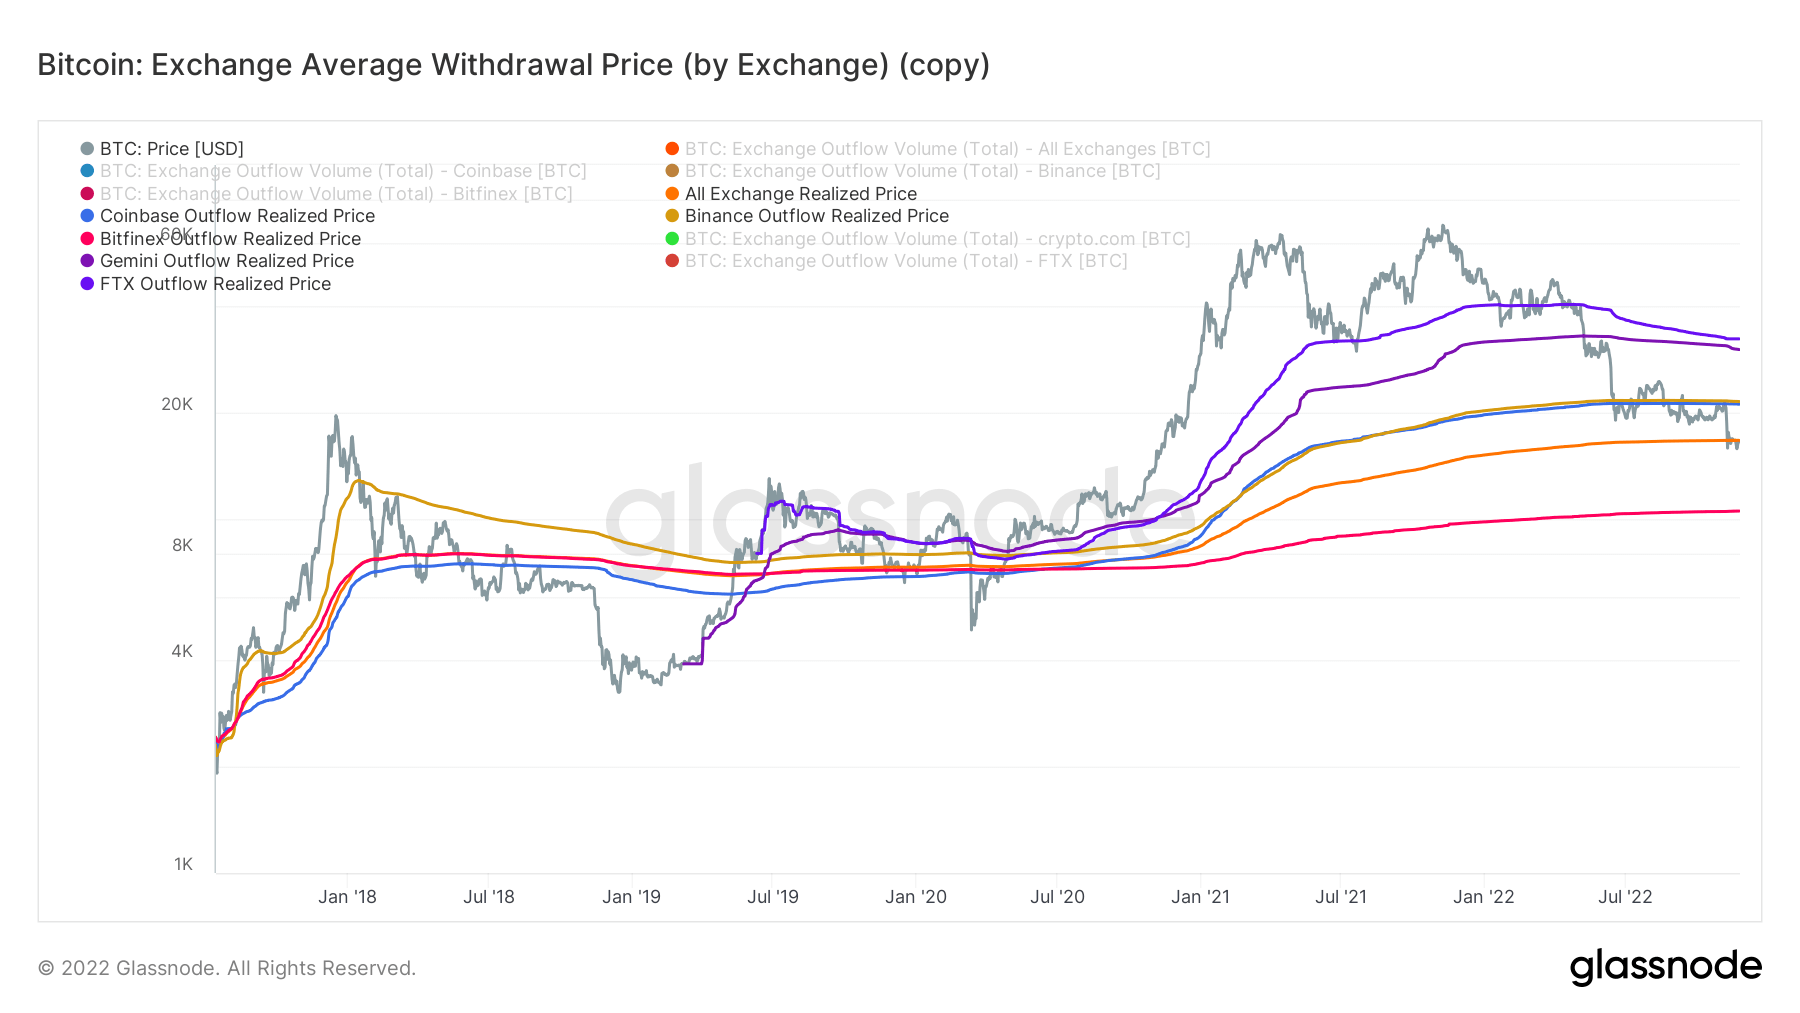 Average withdrawal price of bitcoin on exchanges